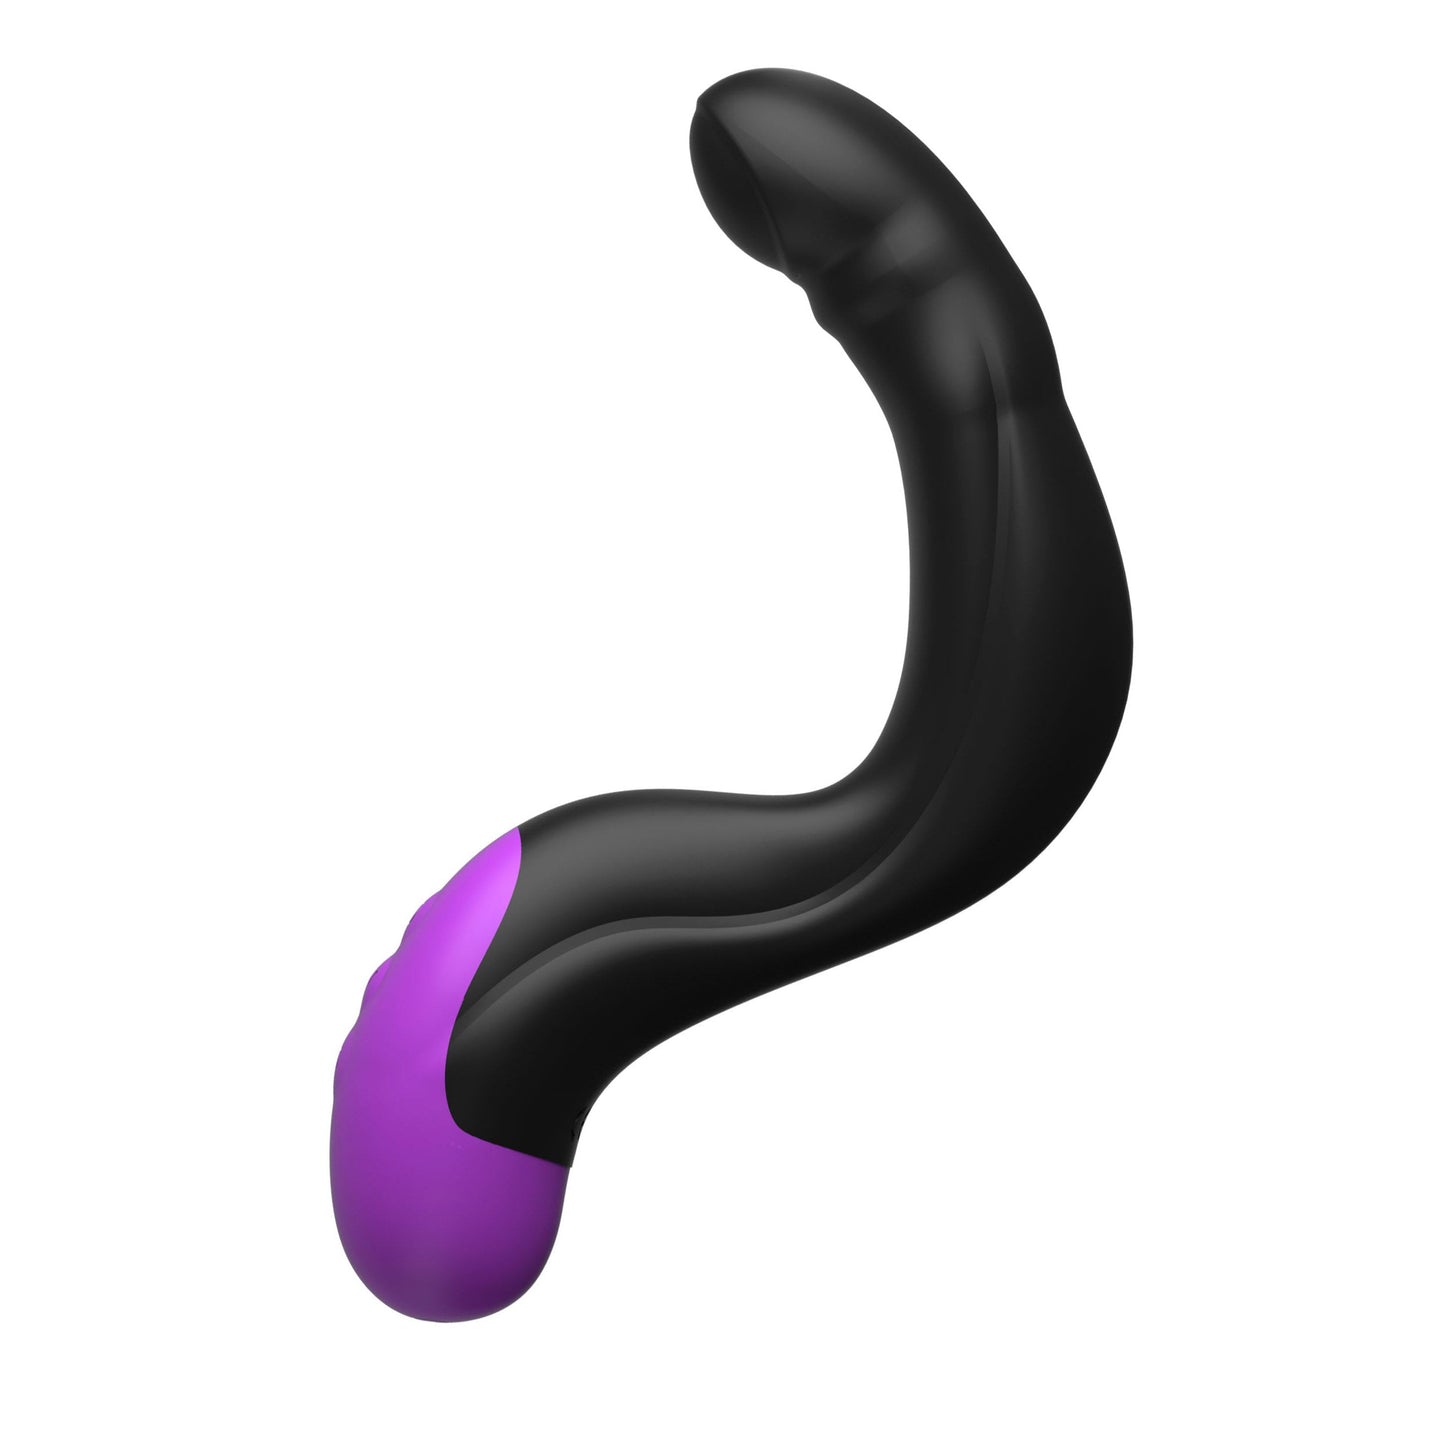 Anal Fantasy Elite Hyper-Pulse P-Spot Massager - Black - Thorn & Feather Sex Toy Canada